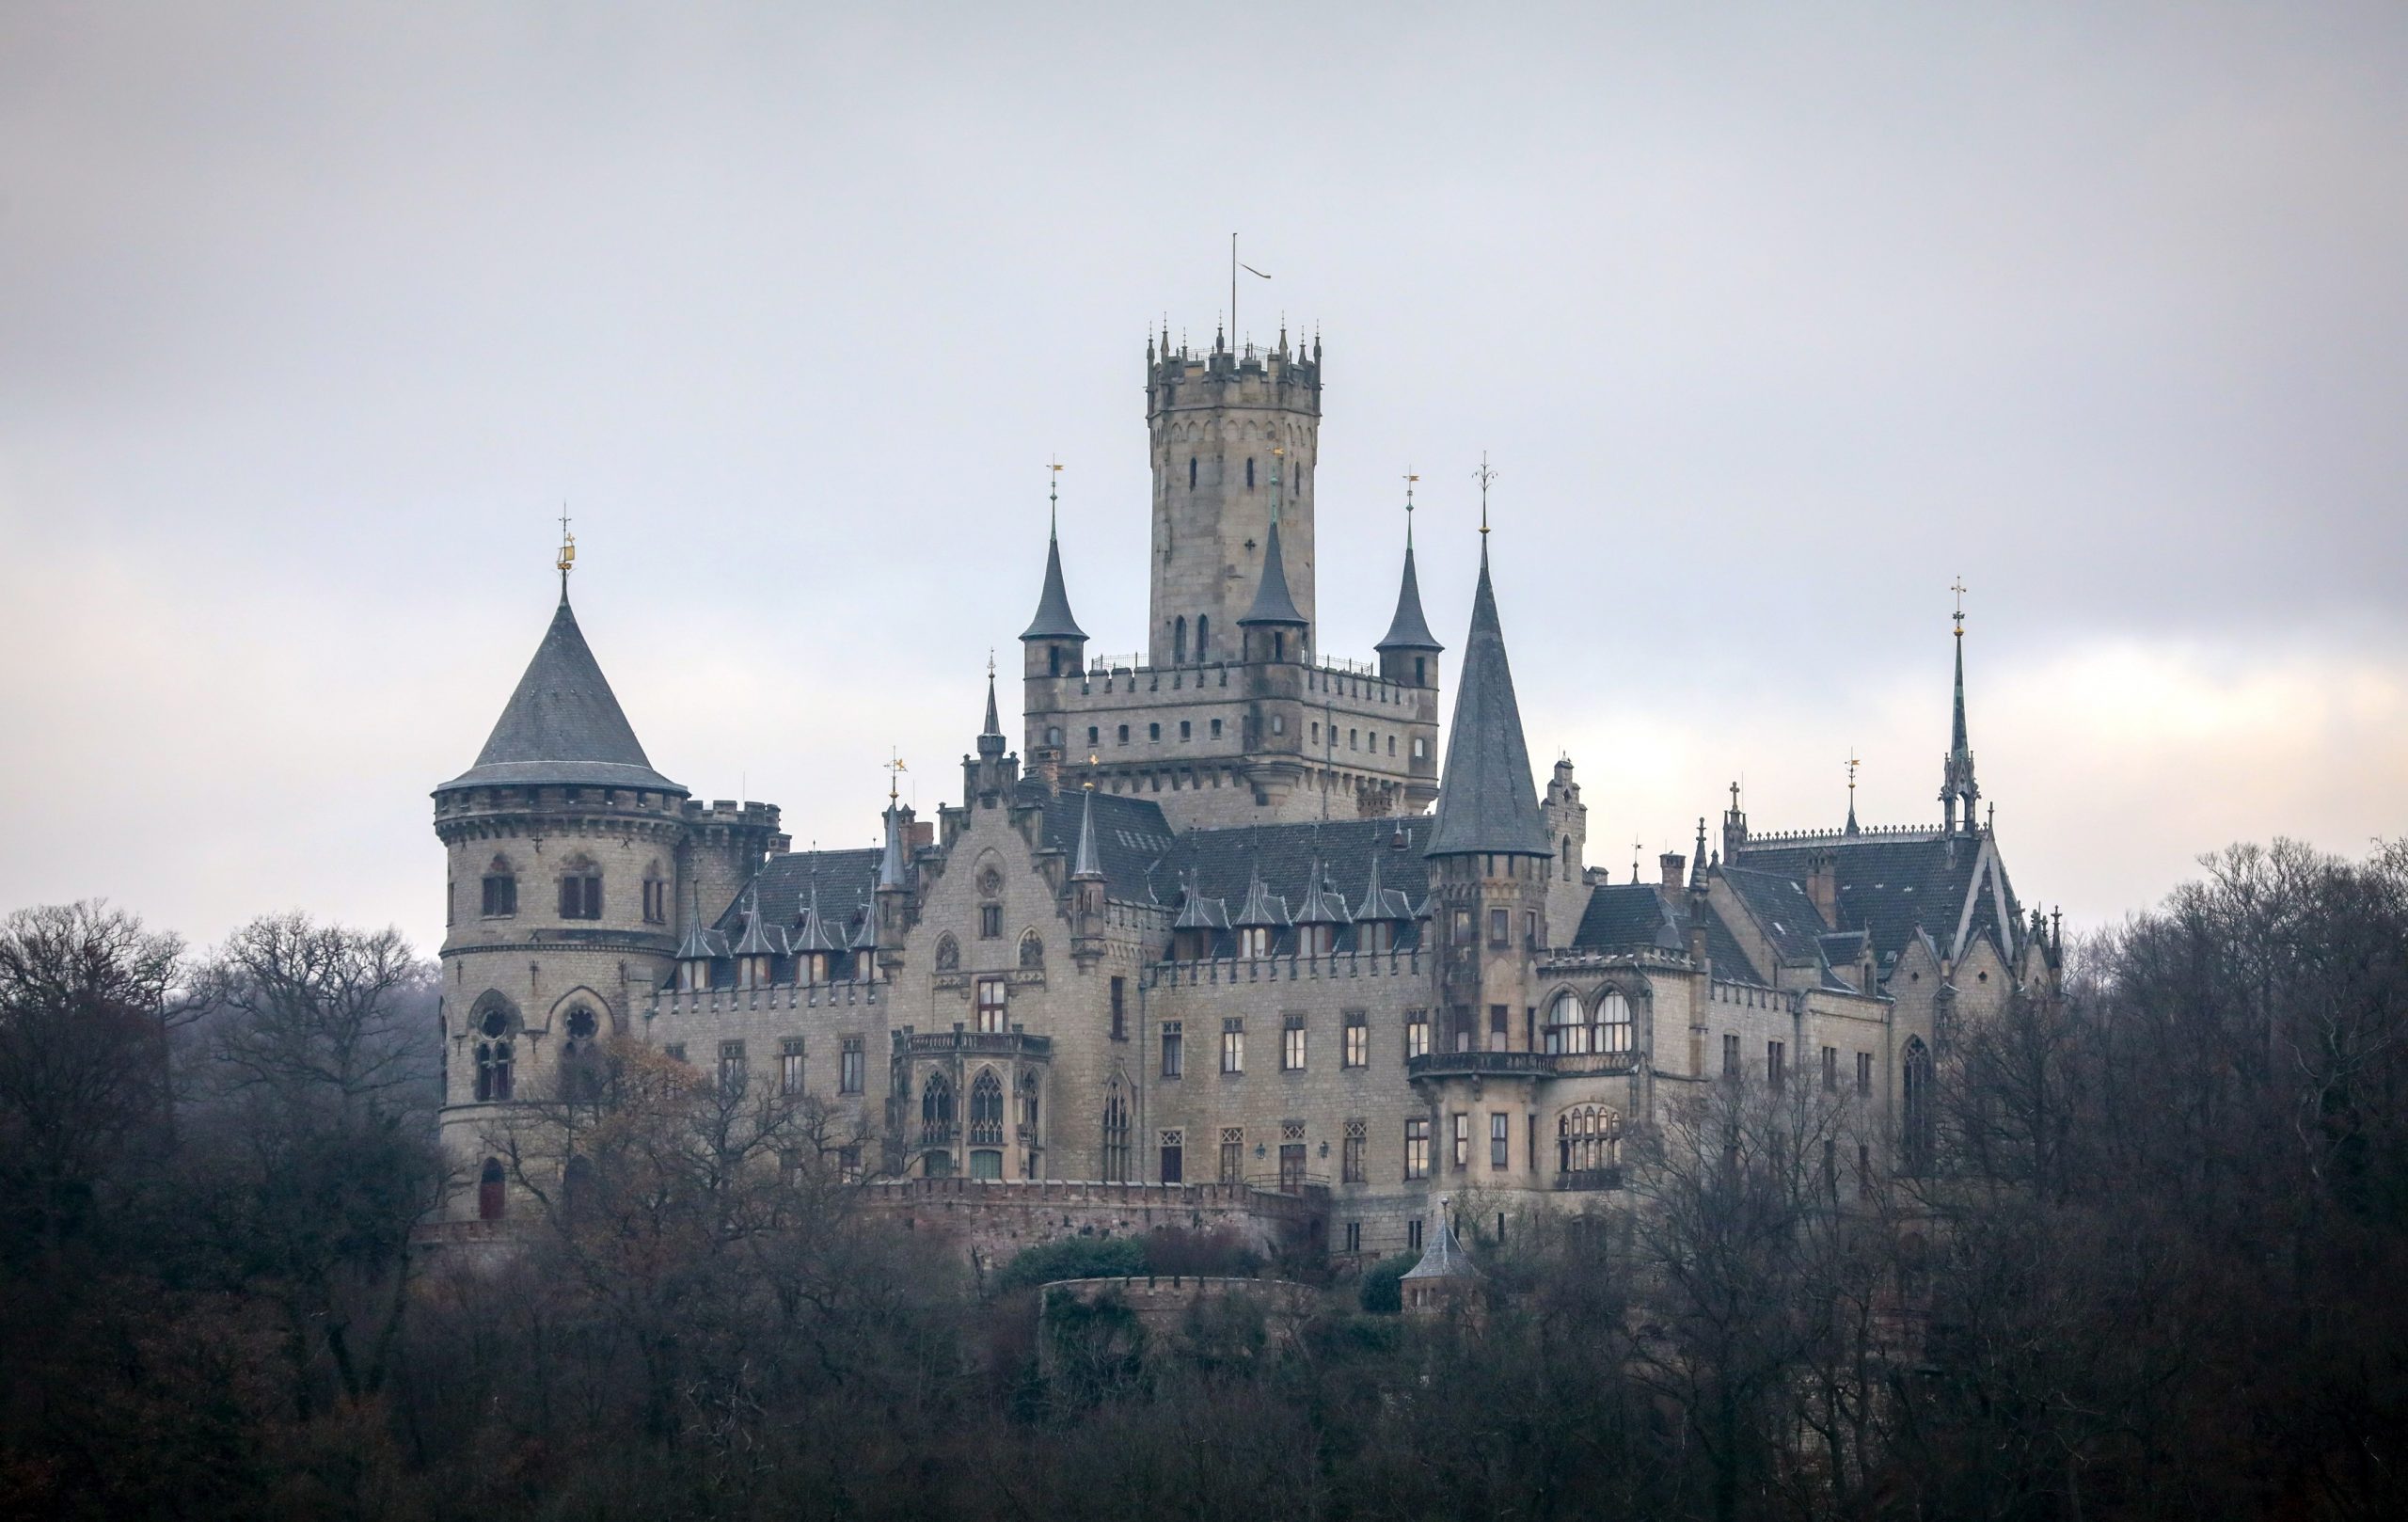 epa09016419 (FILE) - A view of Marienburg castle near Pattensen, northern Germany, 29 December 2018 (reissued 16 February 2021). Prince Ernst August of Hanover is suing his son, Hereditary Prince Ernst-August of Hanover, for the return of ownership of Marienburg Castle and other properties, the Hanover Regional Court said on 16 February 2021. The lawsuit, which has now been served, also demands the return of the Calenberg estate in the Pattensen-Schulenburg municipality as well as the Princely House of Herrenhausen in Hanover to his father.  EPA/FOCKE STRANGMANN *** Local Caption *** 54864843